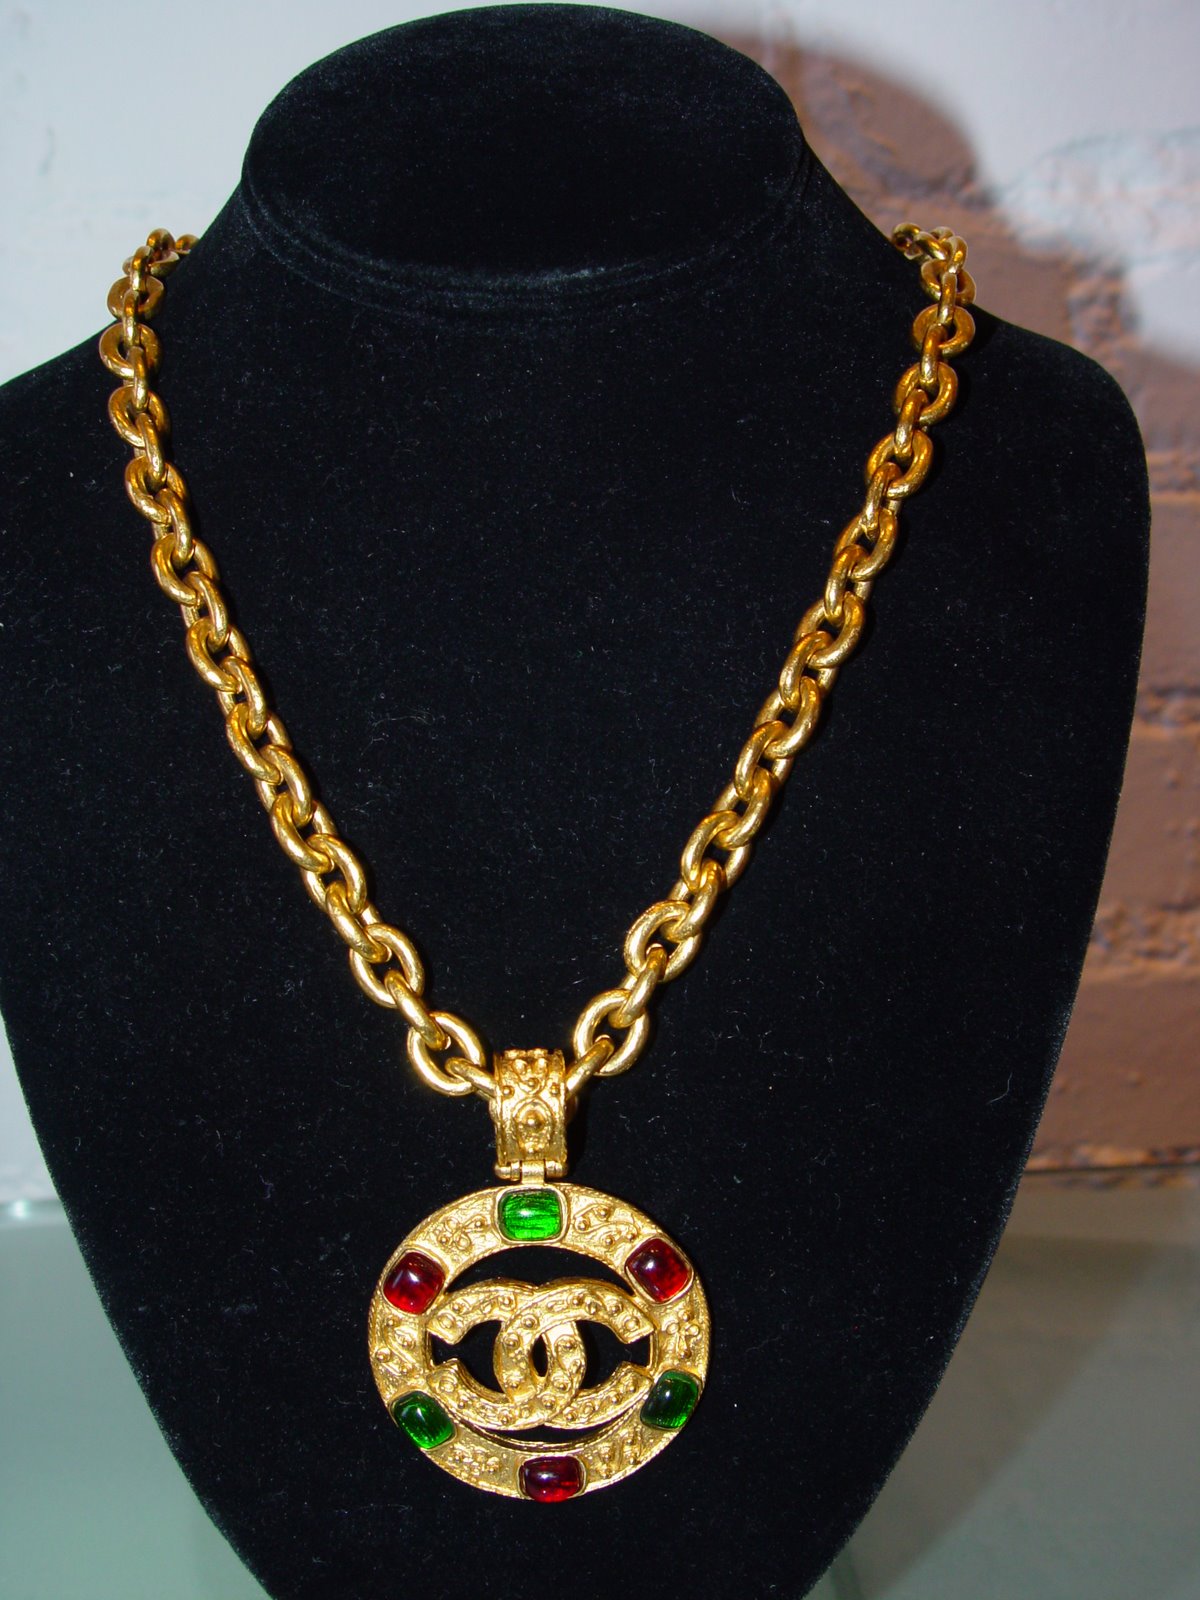 [CHANEL+LARGE+LINK+NECKLACE+WITH+CC+LOGO+MEDAILLON+WITH+RED+AND+GREEN+POURED+GLASS+C+80S.JPG.JPG]